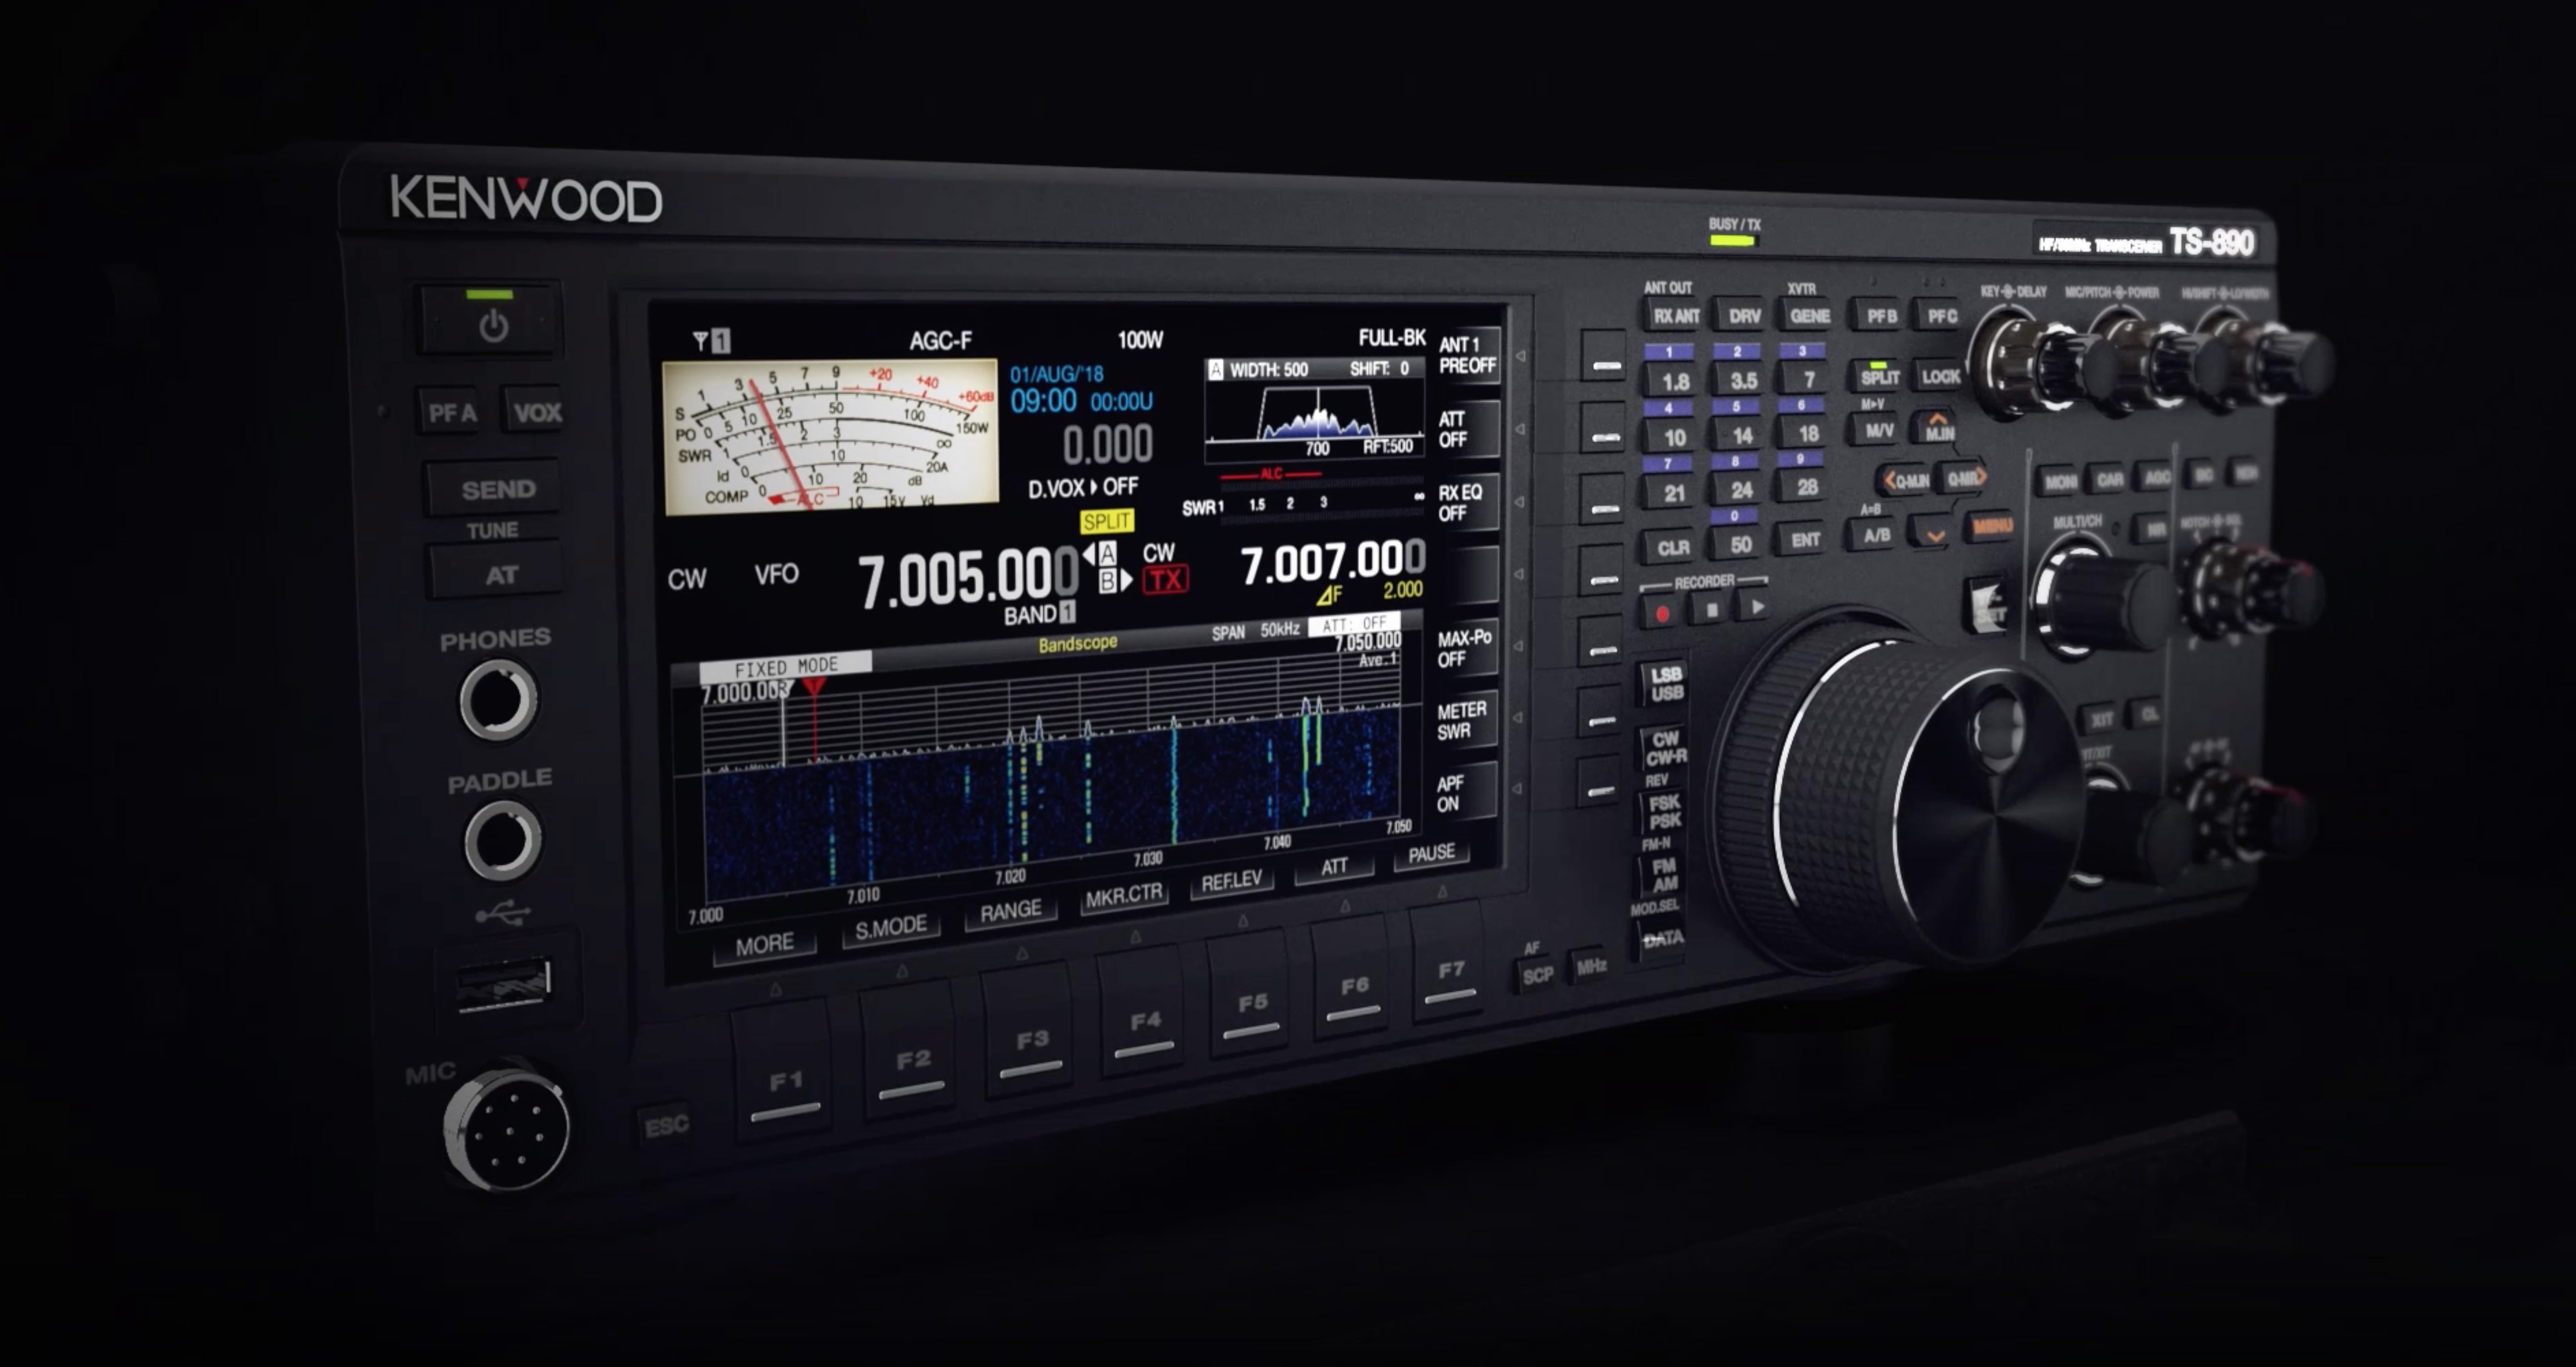 Press release for JVC-Kenwood Ham Radio Products